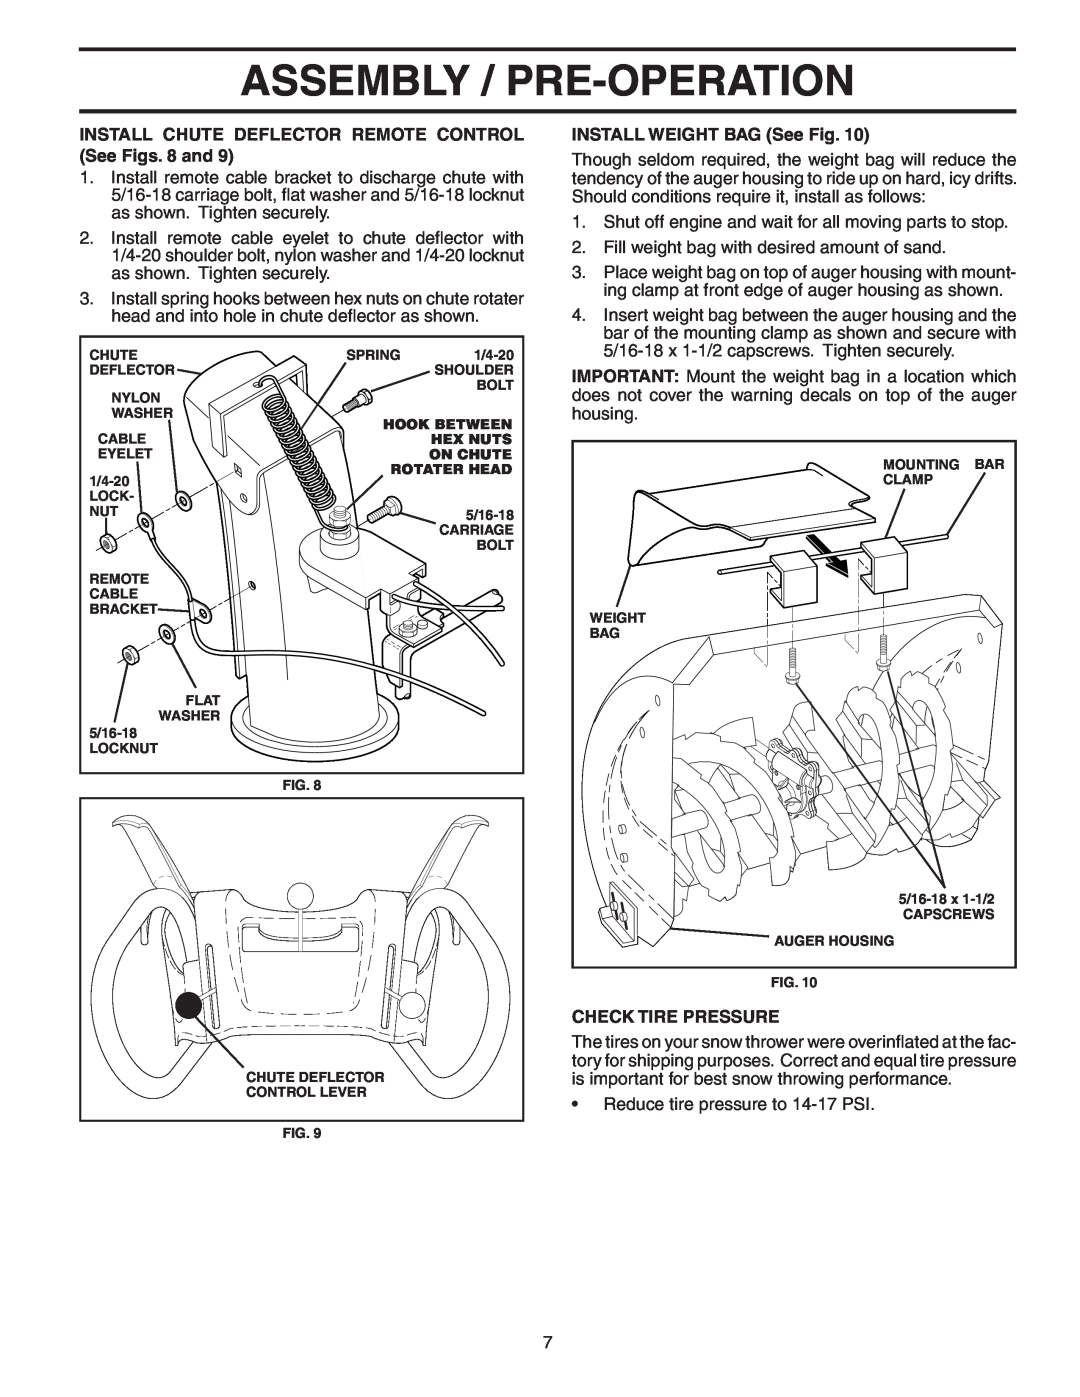 Poulan 185136 Assembly / Pre-Operation, INSTALL CHUTE DEFLECTOR REMOTE CONTROL See Figs. 8 and, INSTALL WEIGHT BAG See Fig 